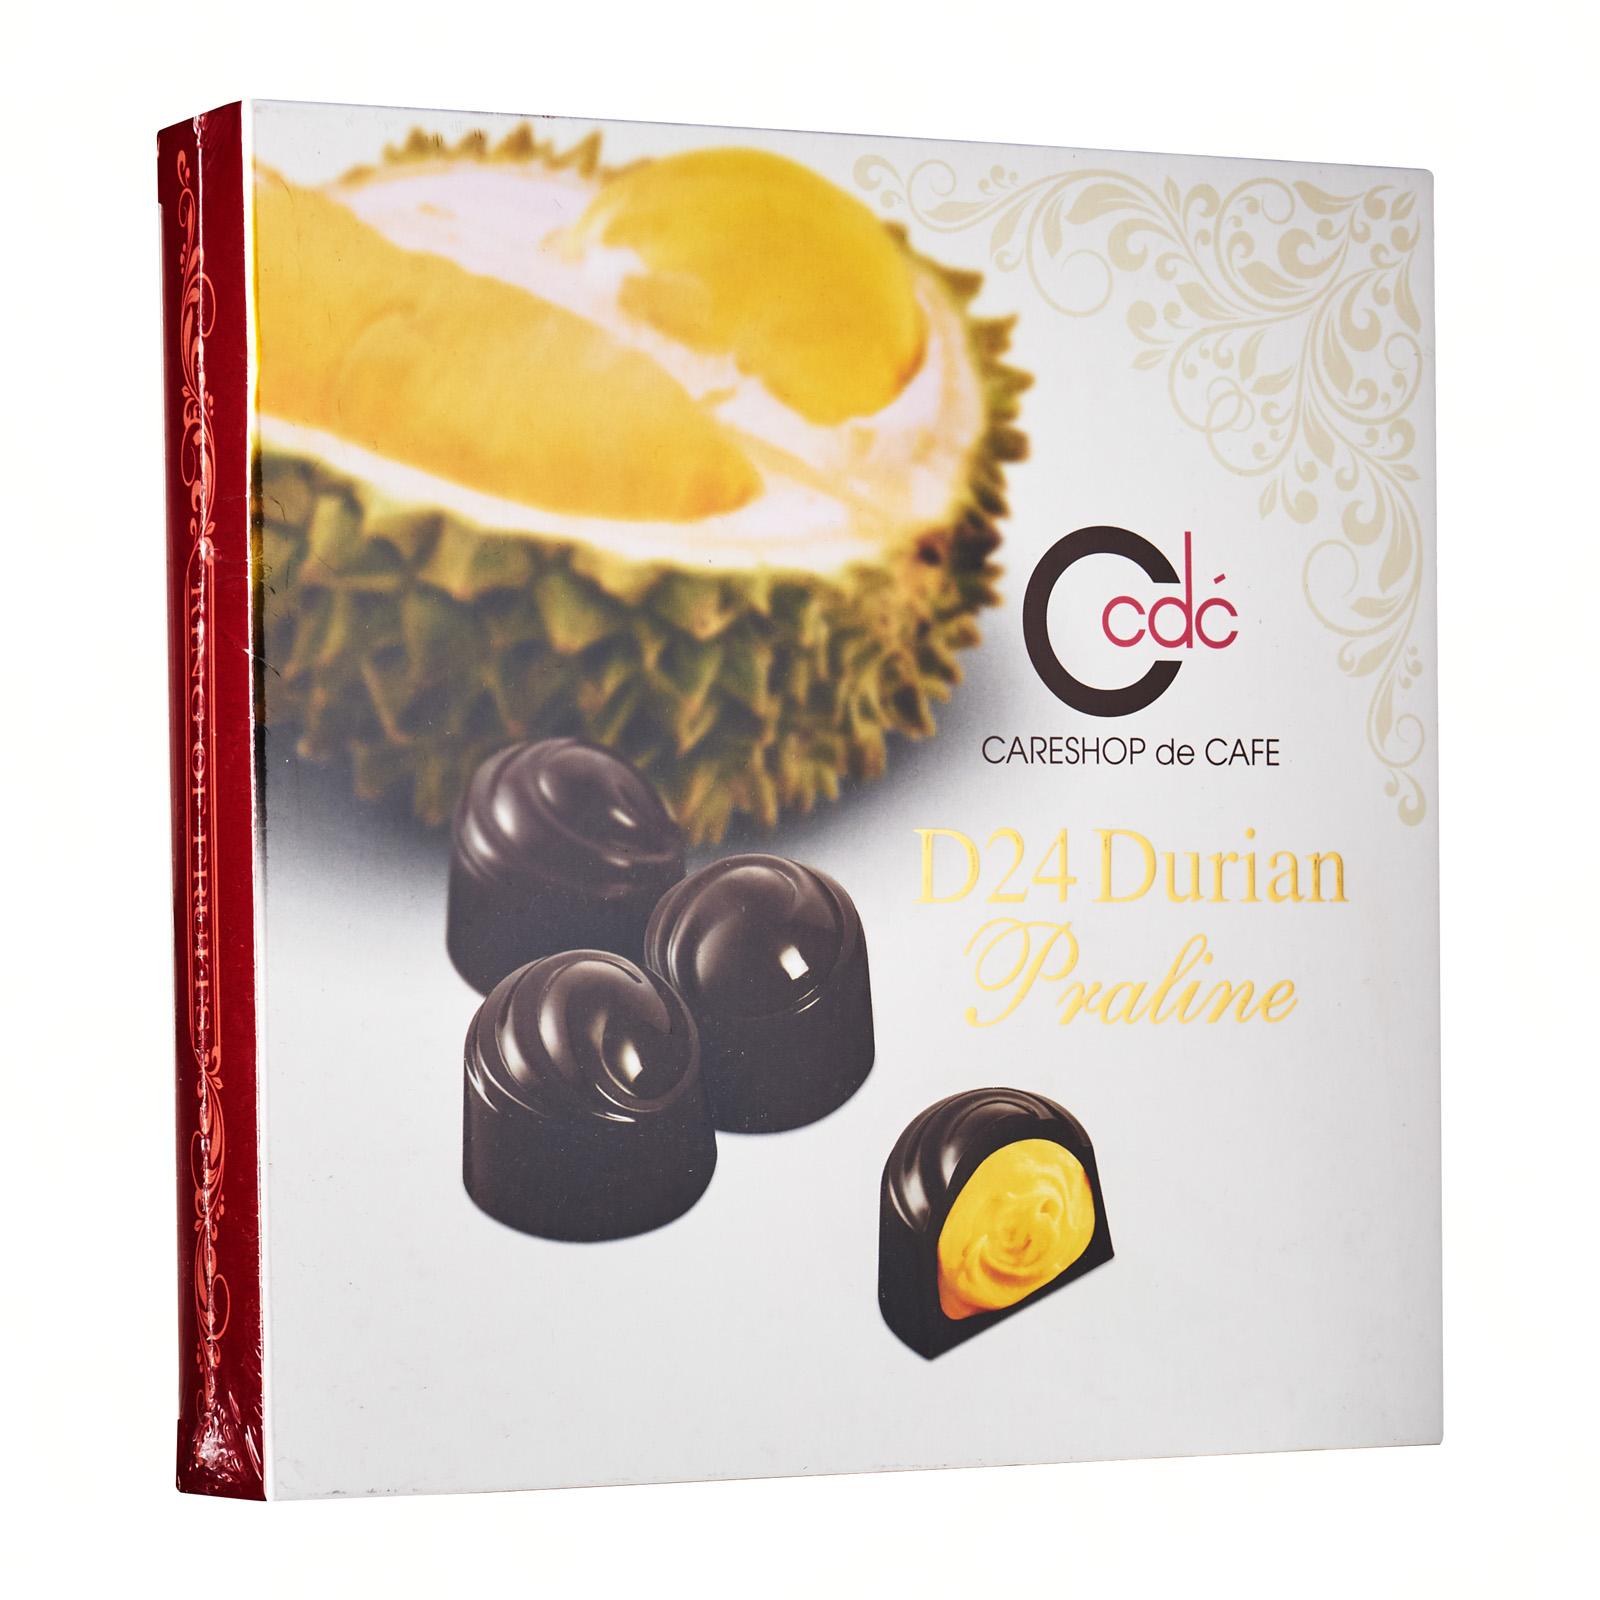 Using pure D24 durian from the best plantation in Malaysia, the durian filling is wrapped around by pure dark chocolate.